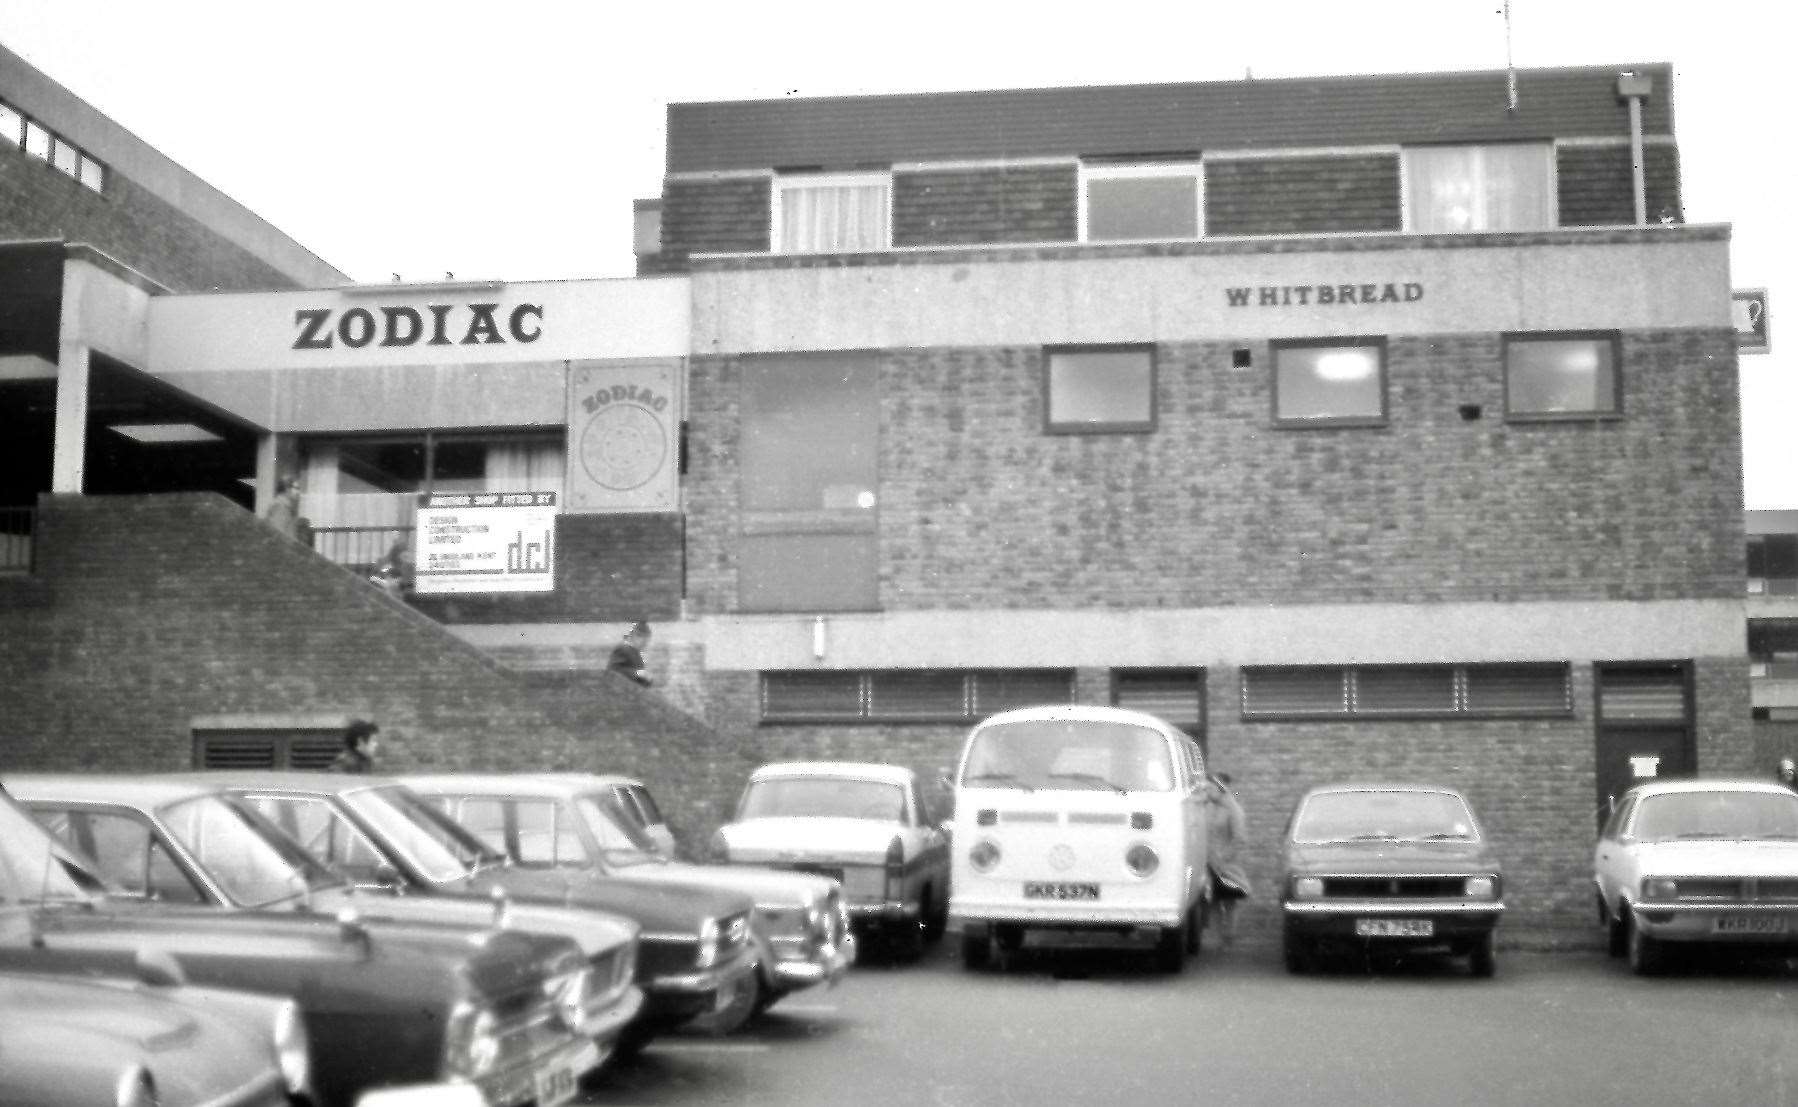 1975 - The Zodiac at the Tufton Centre was said to be a replacement for the two public houses that made way for the said shopping centre - the Wellington Hotel and the Coach and Horses. Upon the upgrade of the shopping centre in 1989, which saw a name change to County Square, the public house closed. Picture: Steve Salter